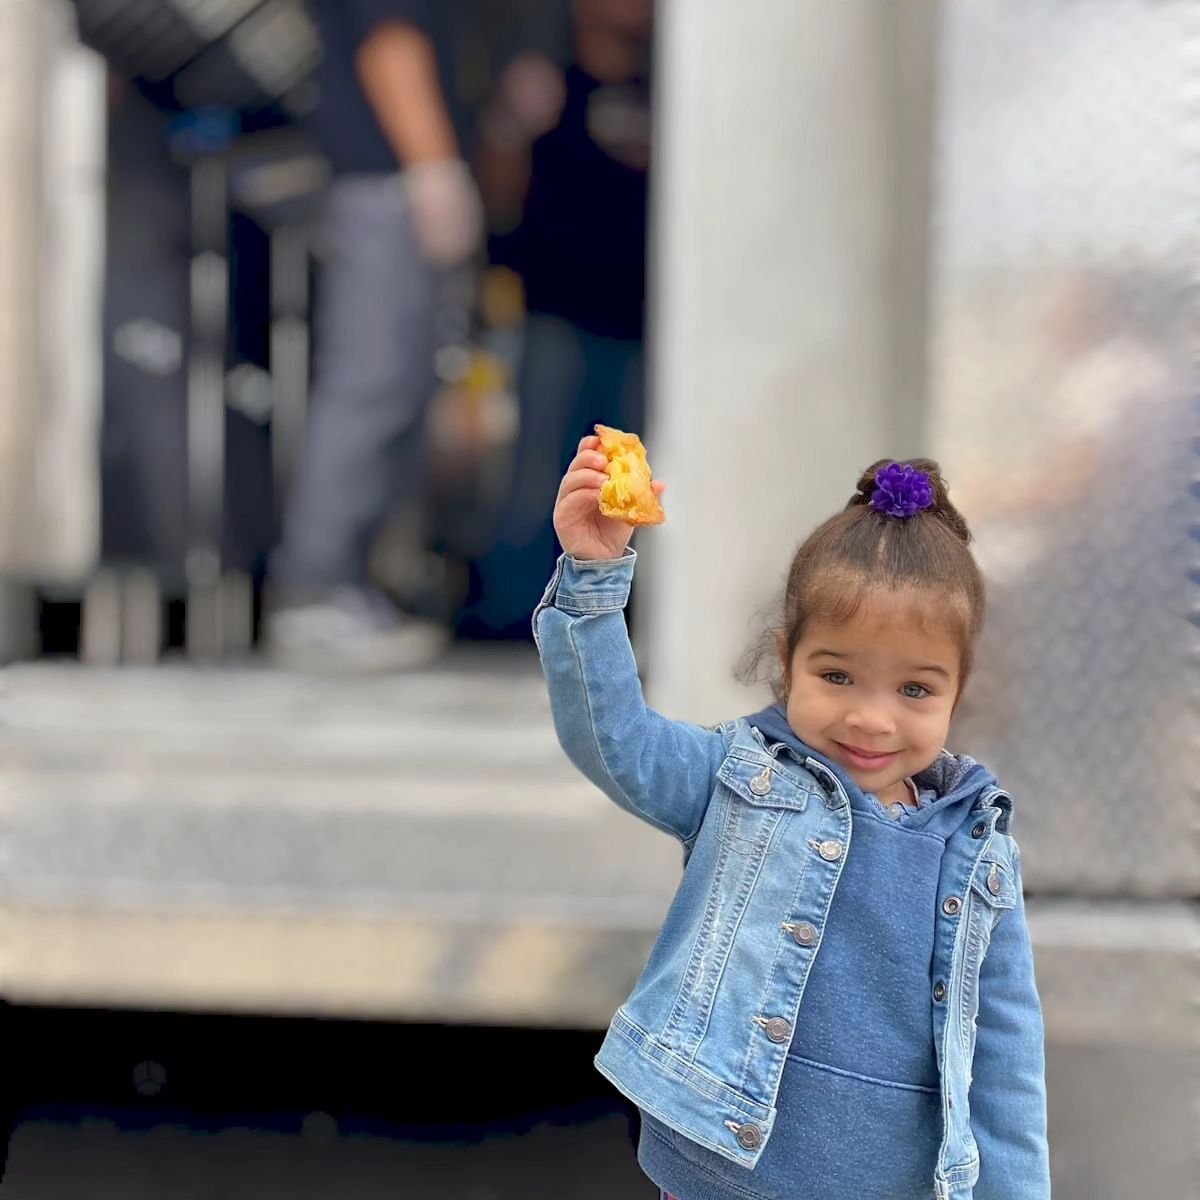 The ultimate comfort food with our Mac and Cheese Empanada! The smile on her face says it all - our heart-shaped empanadas are a total win every time.

Today, we are taking the day off to spend with our loved ones! 

Stay tuned for this upcoming week